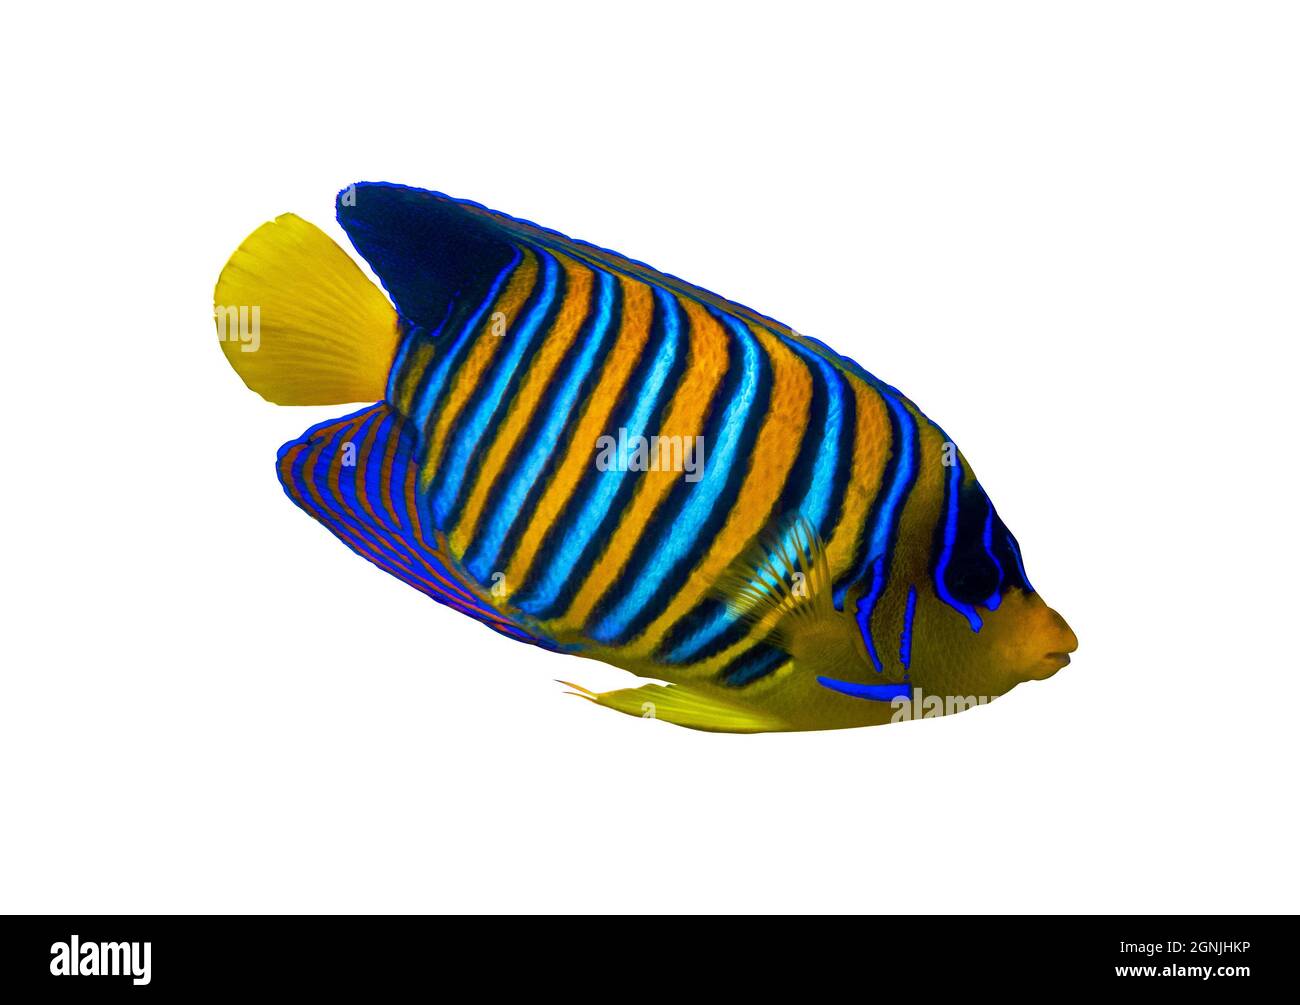 Royal Angelfish (Regal Angel Fish), coralfish isolated on a white background. Tropical colorful fish with yellow fins, orange, white and blue stripes Stock Photo